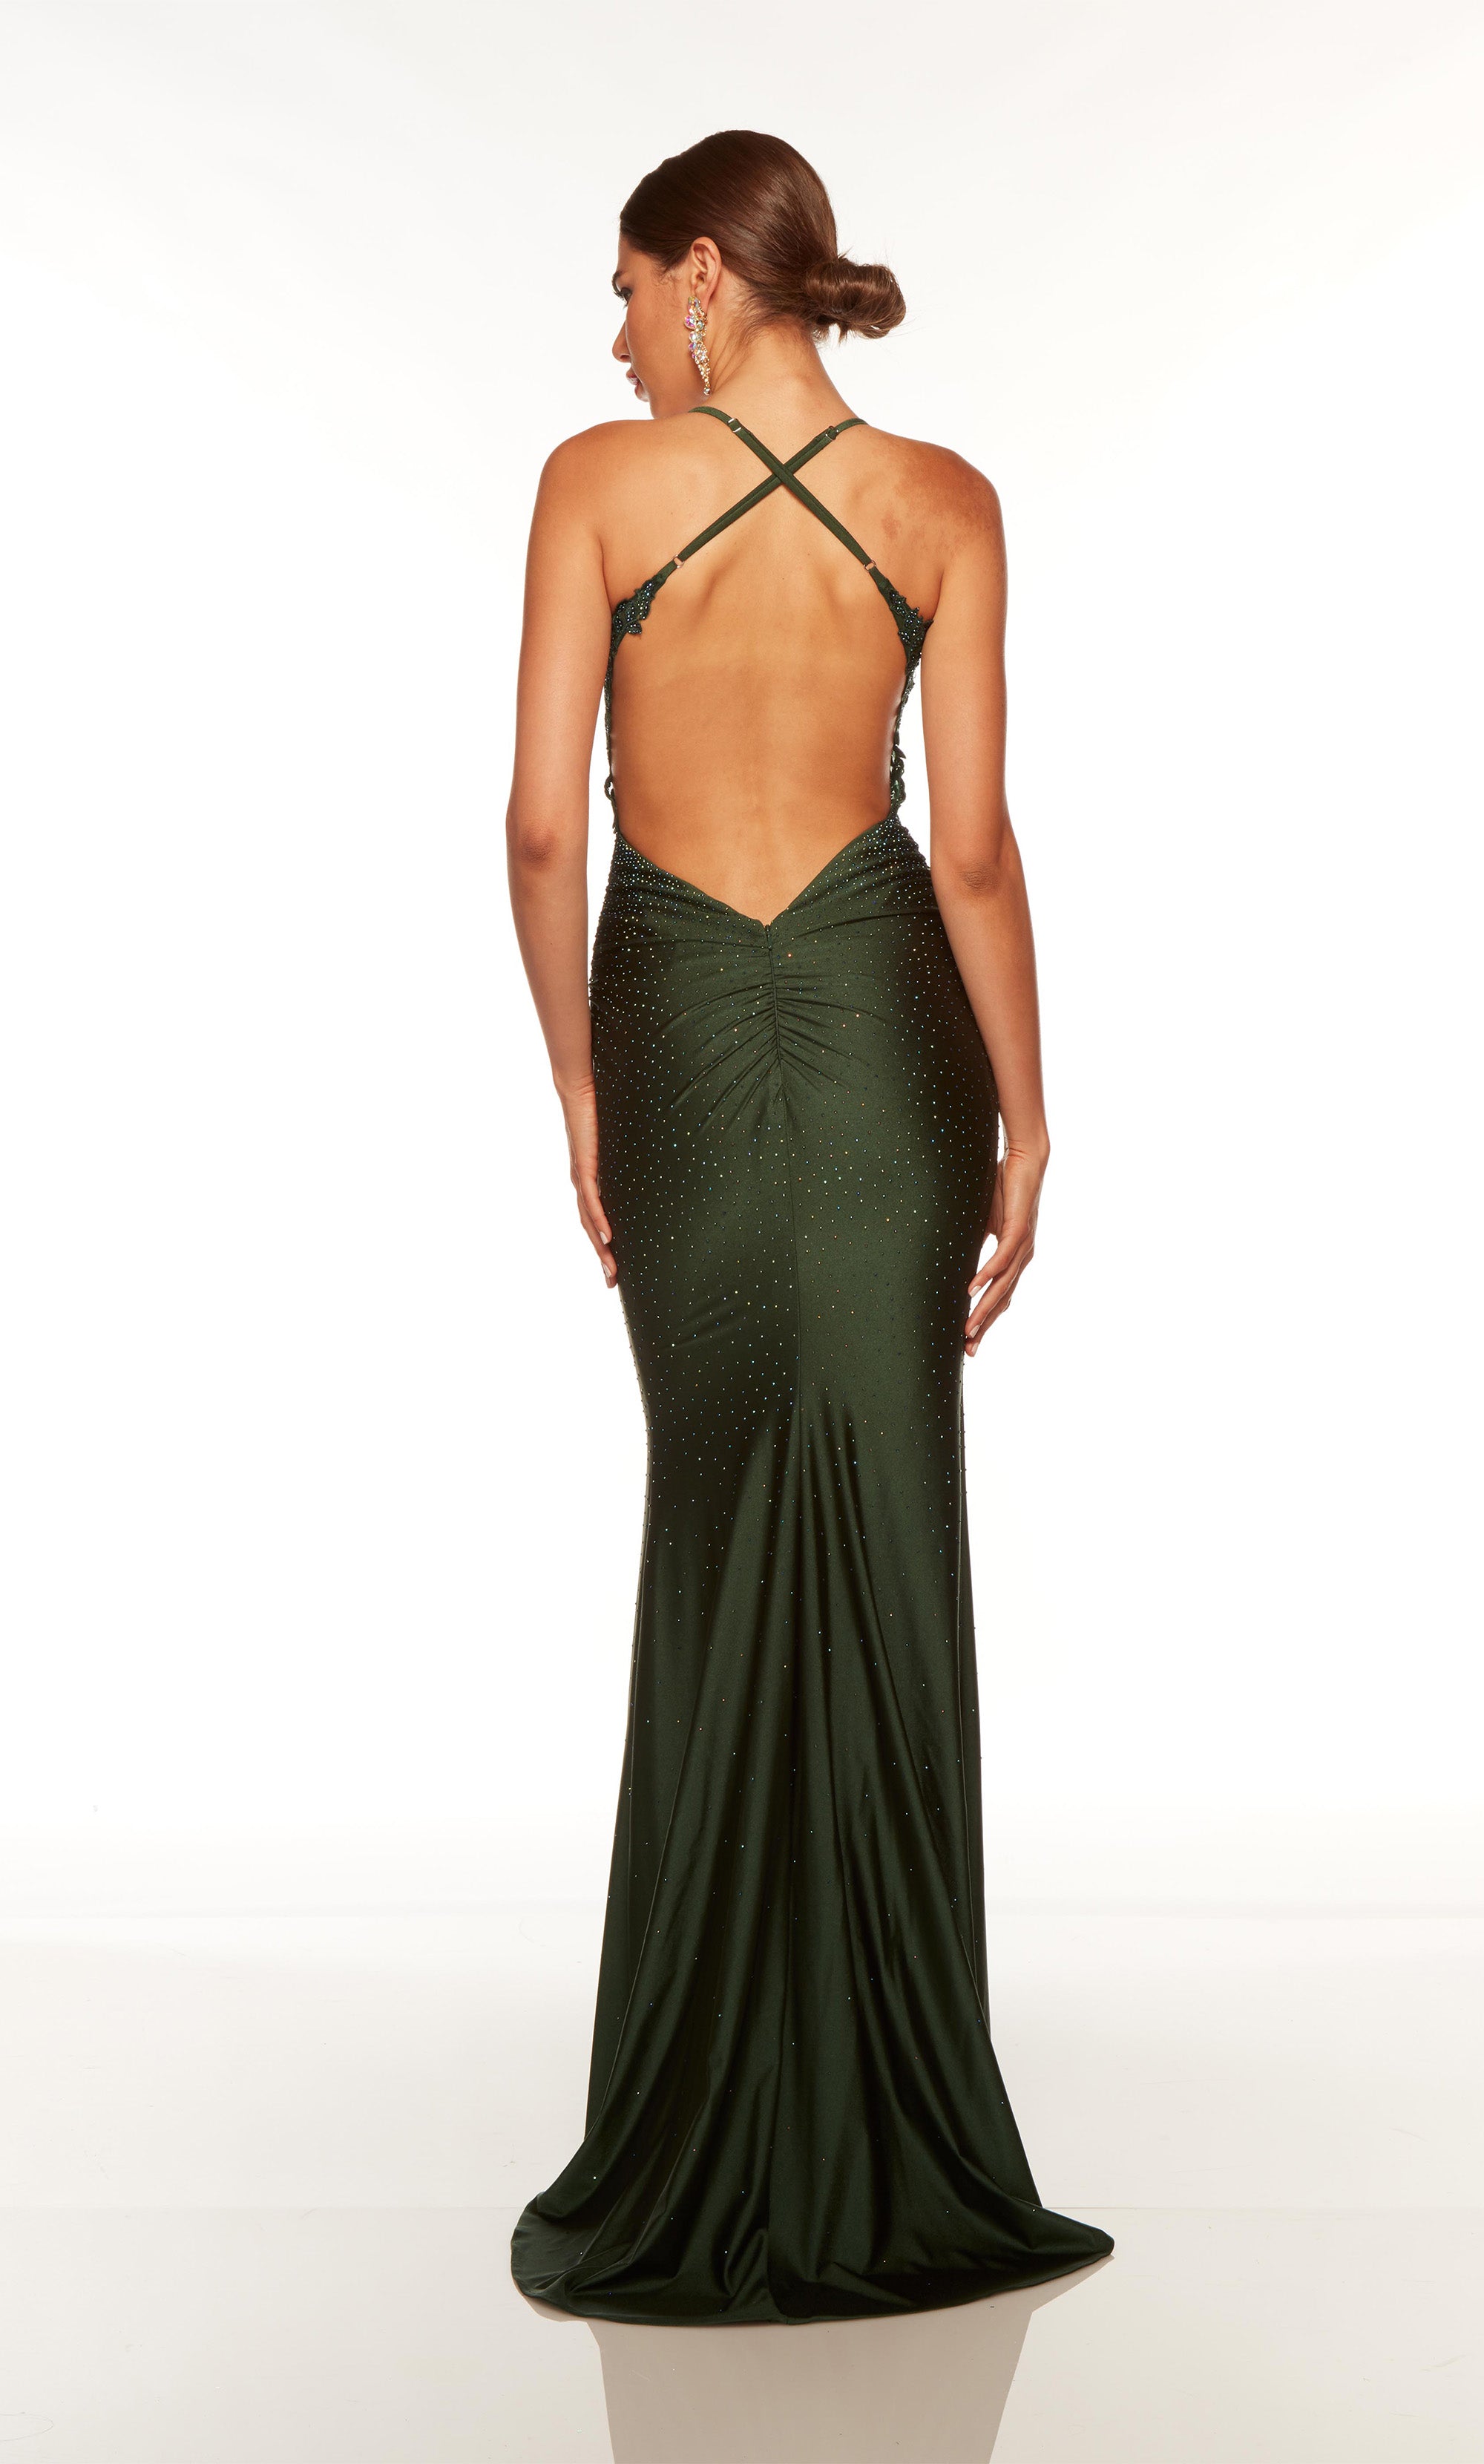 Constance strappy back satin ball dress in ever green - Bay Bridal